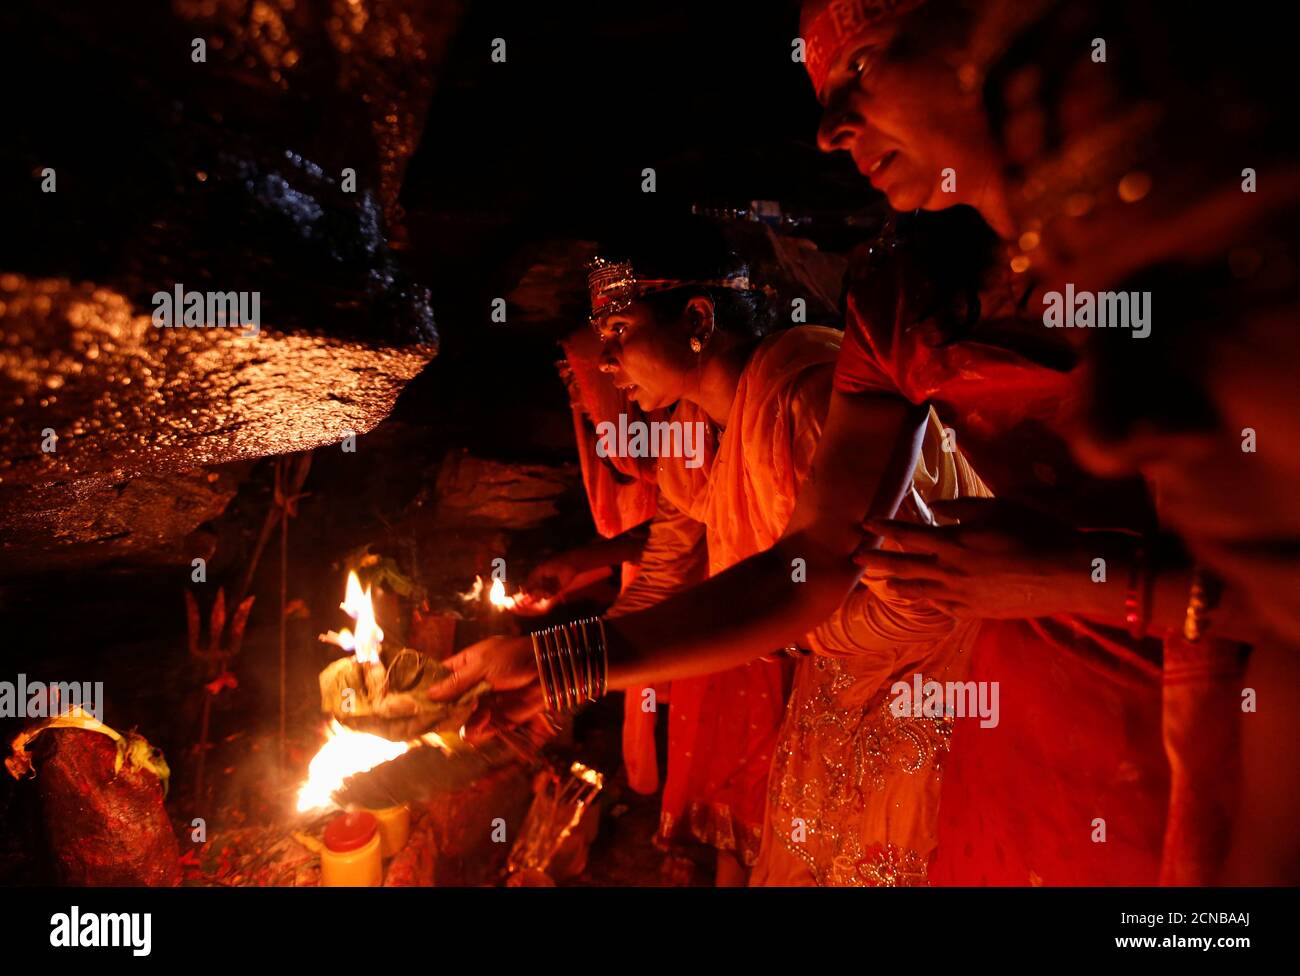 Devotees perform religious rituals as they take part in the "Bol Bom" (Say  Shiva) pilgrimage in Kathmandu, Nepal, July 30, 2018. The faithful,  chanting the name of Lord Shiva, trek about 15